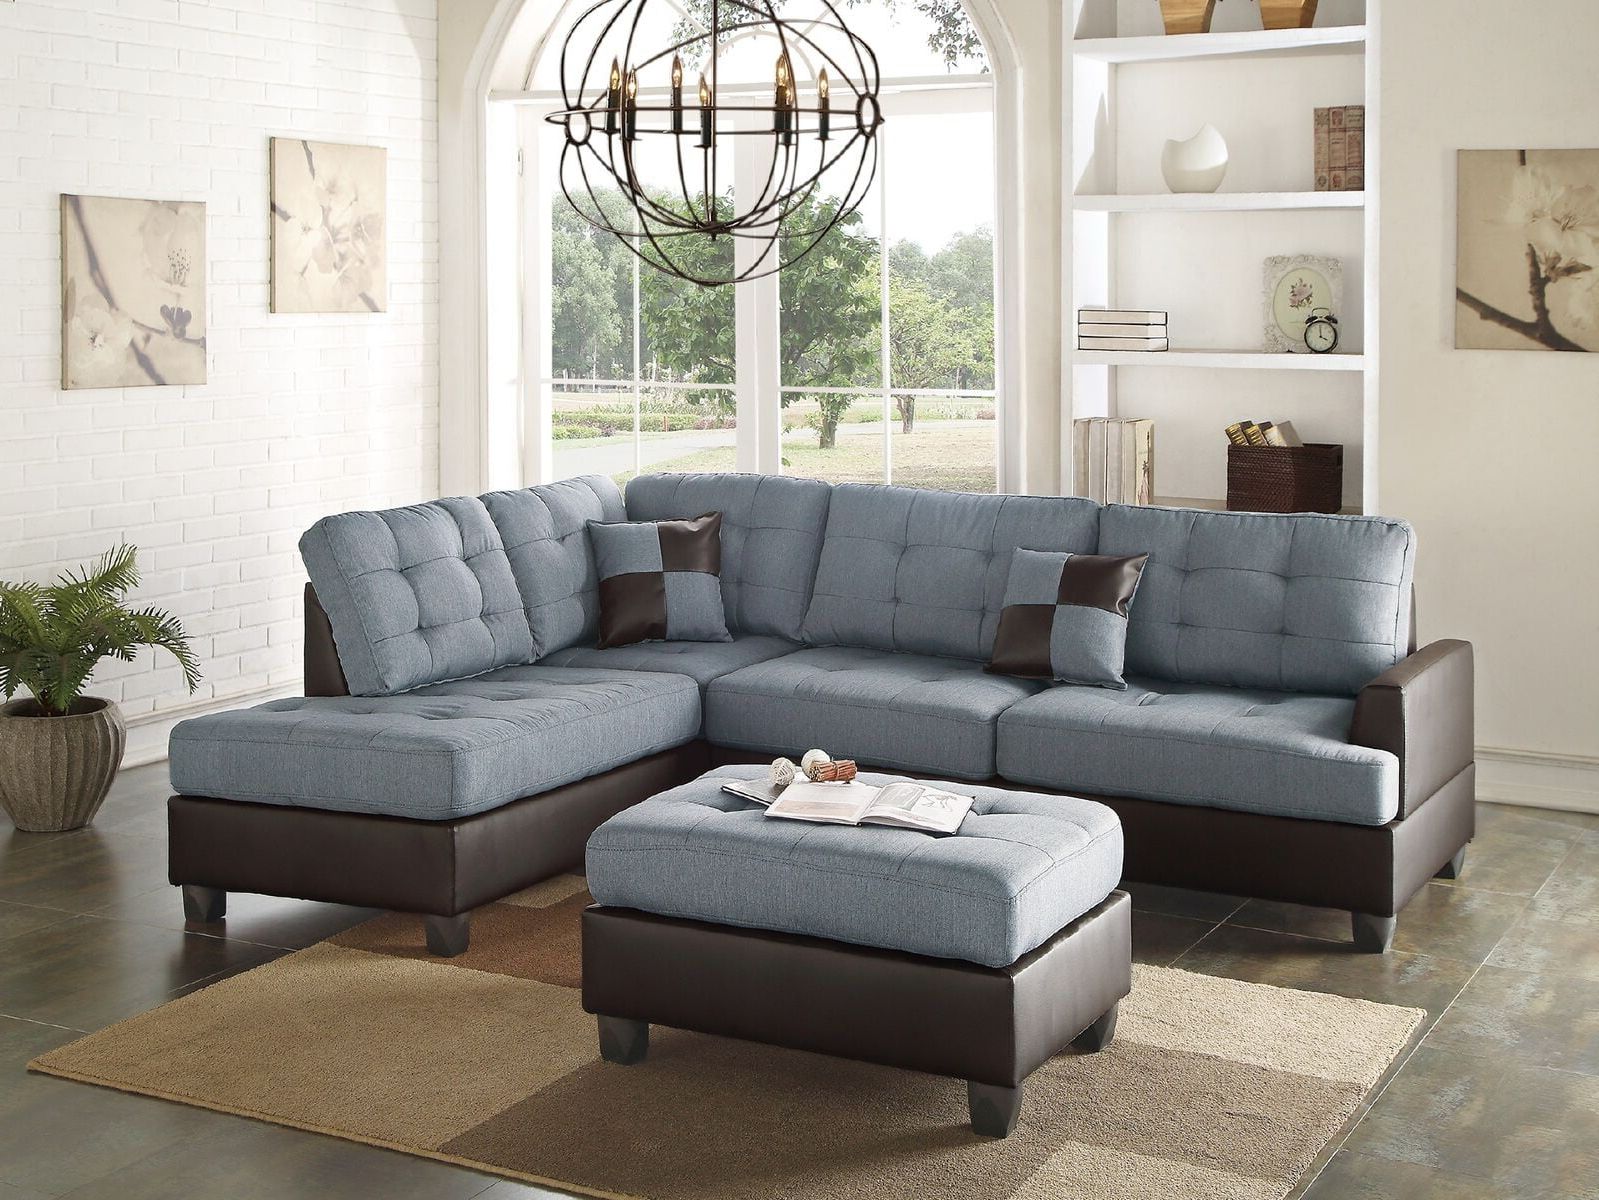 Sectional Sofa Set Contemporary Grey Linen Like Fabric Sofa Chaise Inside Sofas With Ottomans (Gallery 19 of 20)